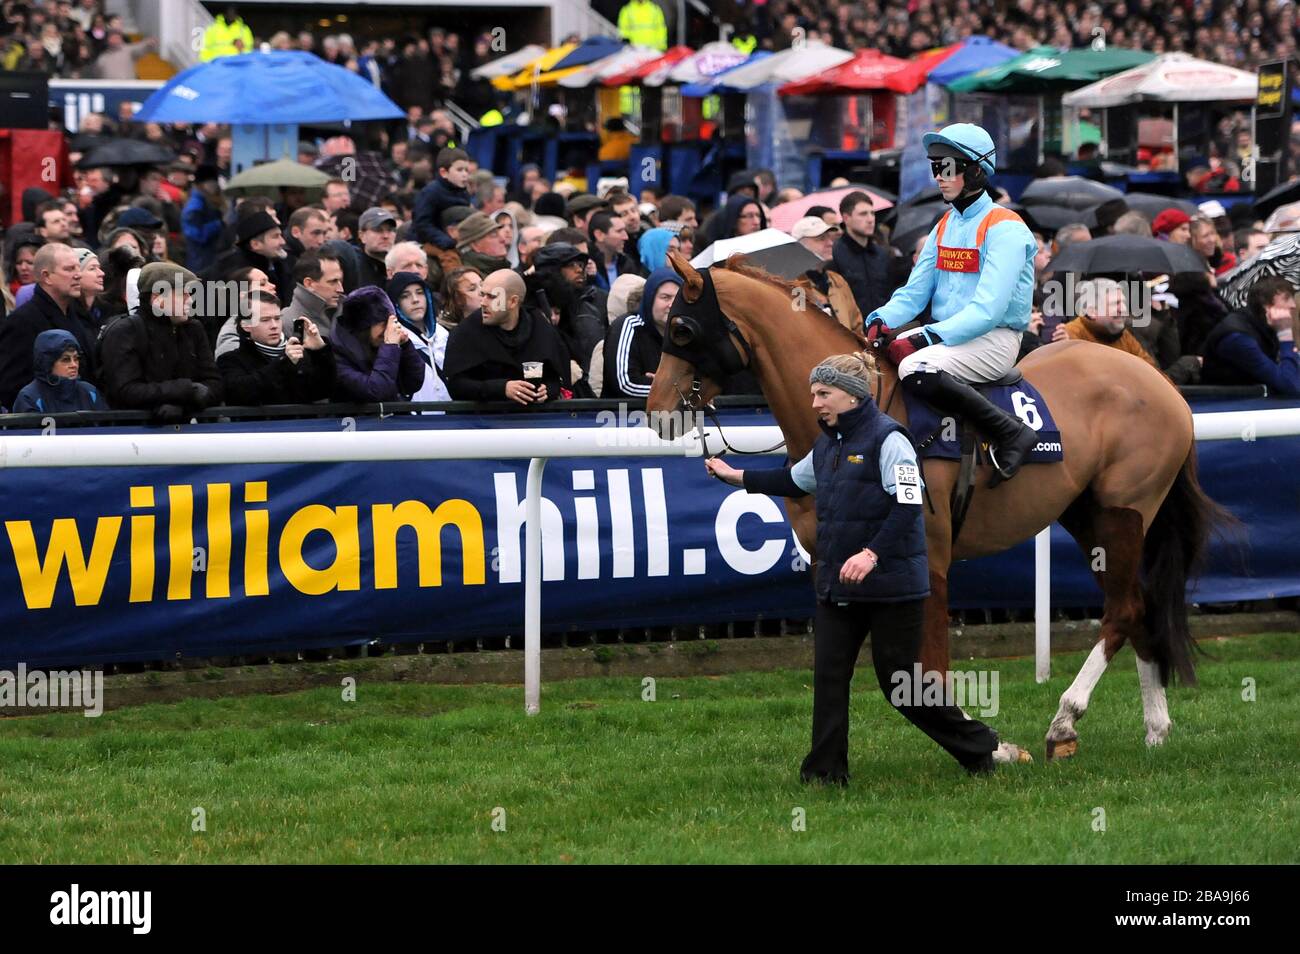 Junior ridden by Conor O'Farrell is paraded in front of the stands before the start of the William Hill King George VI Chase Stock Photo